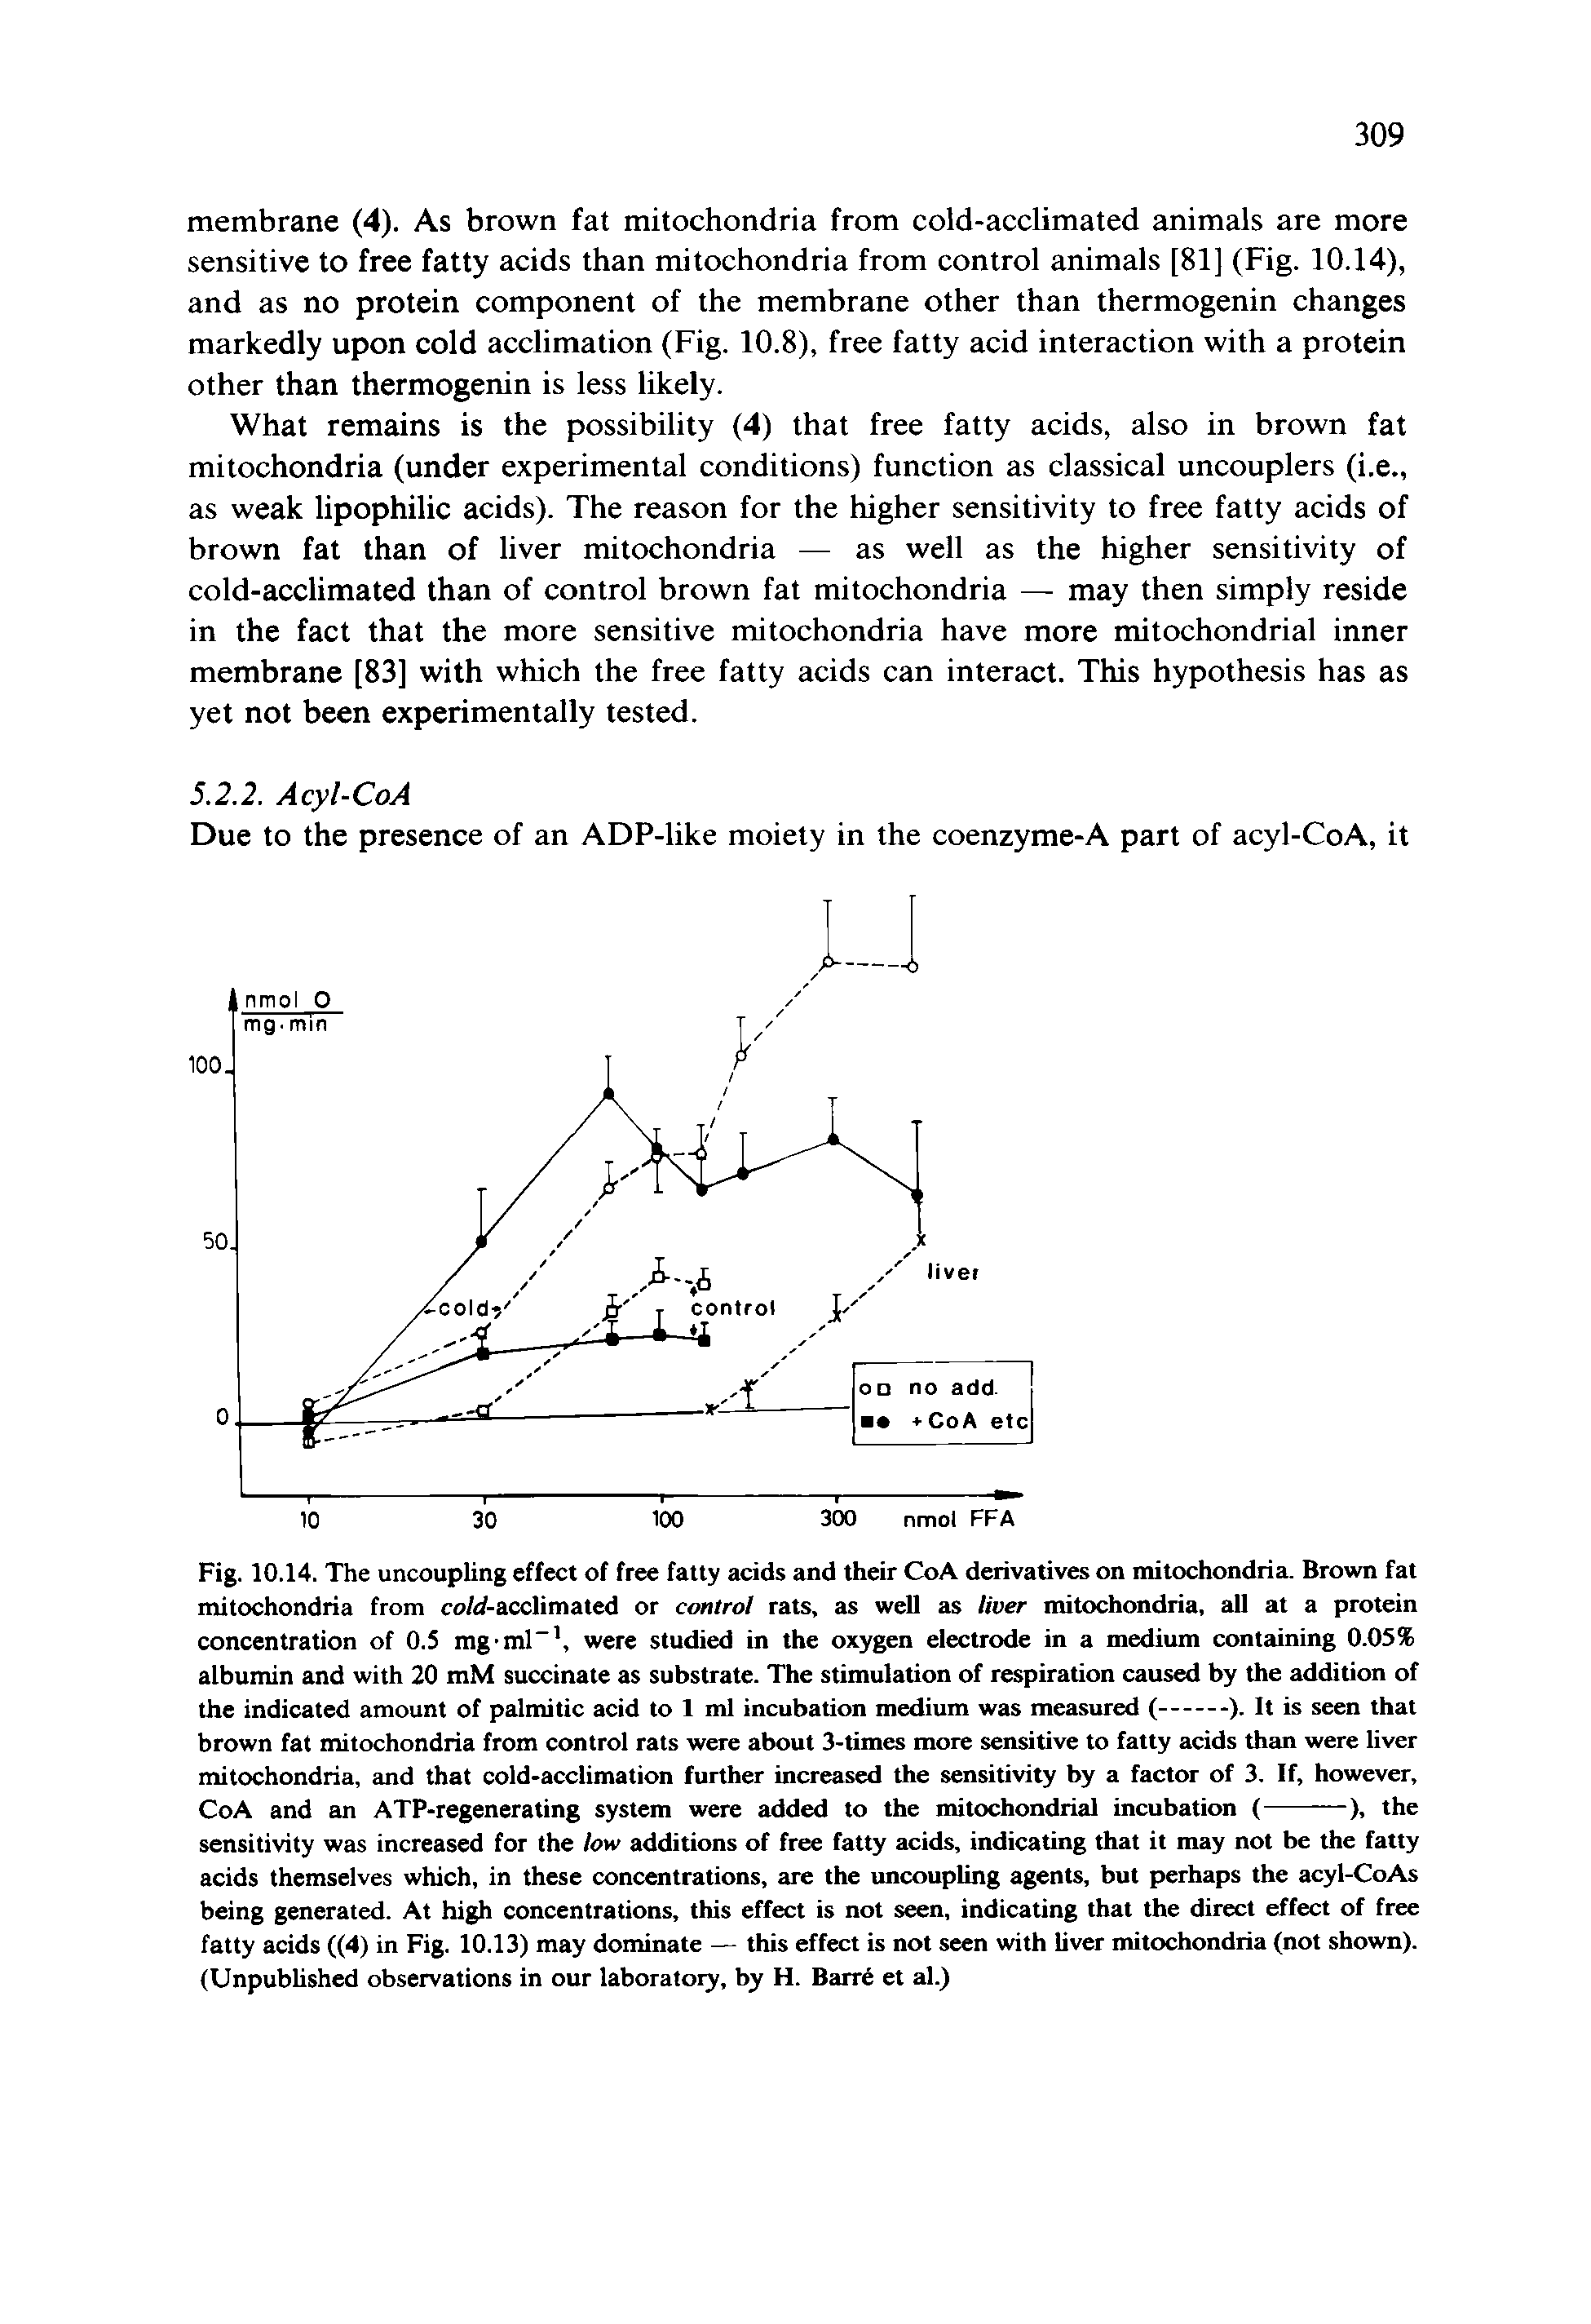 Fig. 10.14. The uncoupling effect of free fatty acids and their CoA derivatives on mitochondria. Brown fat mitochondria from co/4-accIimated or control rats, as well as Hver mitochondria, all at a protein concentration of 0.5 mg ml , were studied in the oxygen electrode in a medium containing 0.05% albumin and with 20 mM succinate as substrate. The stimulation of respiration caused by the addition of...